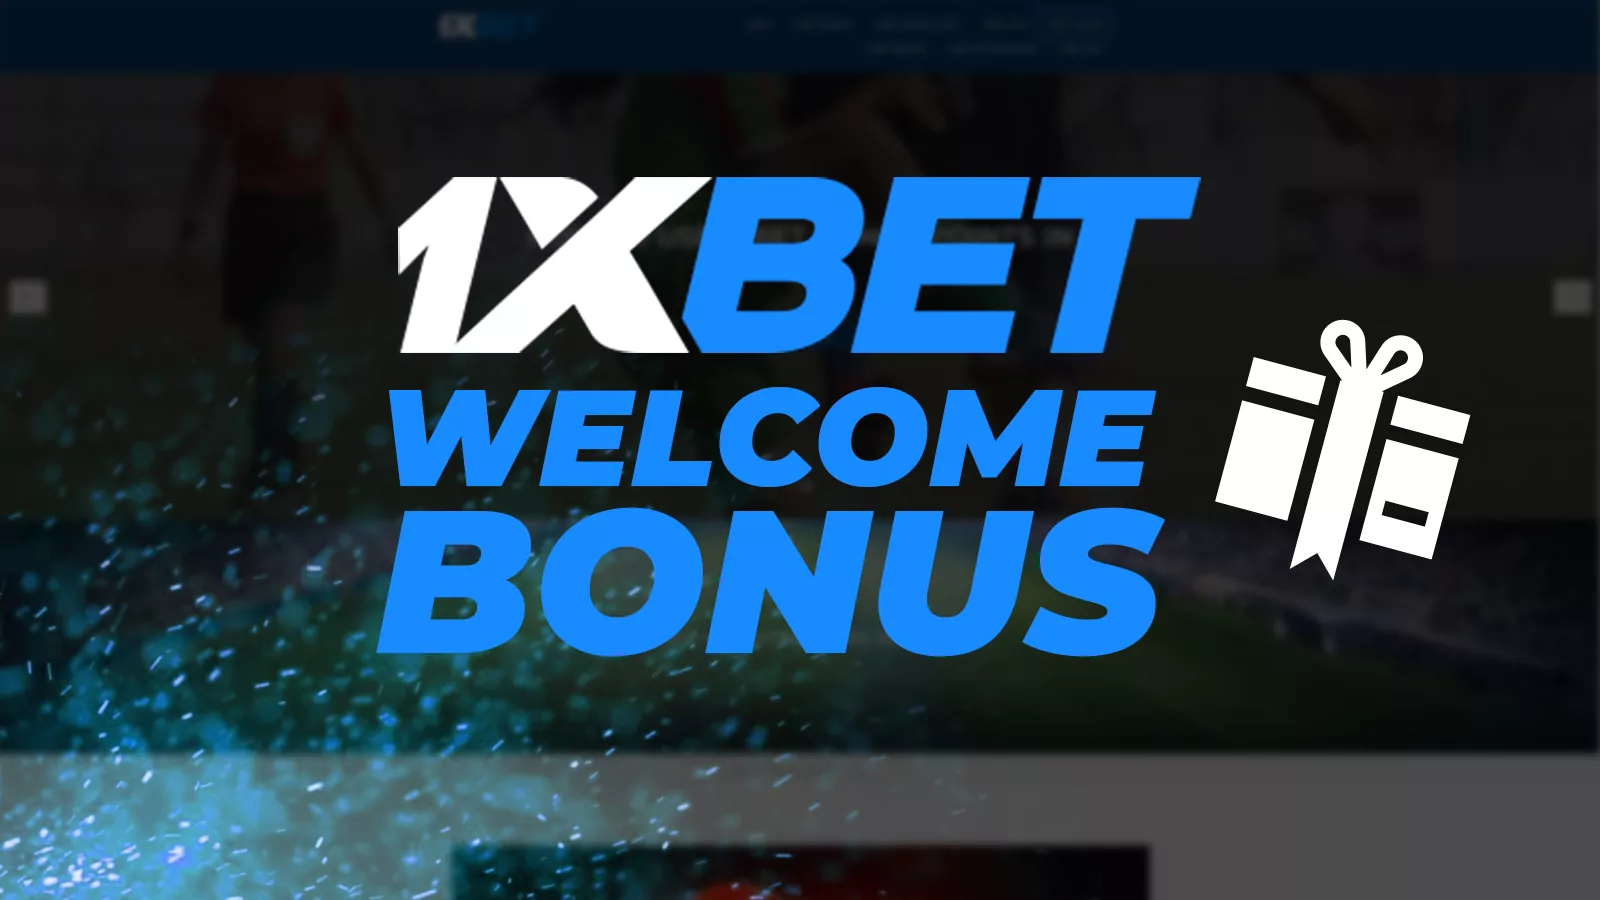 Only verified players can get the welcome bonus from 1xBet.